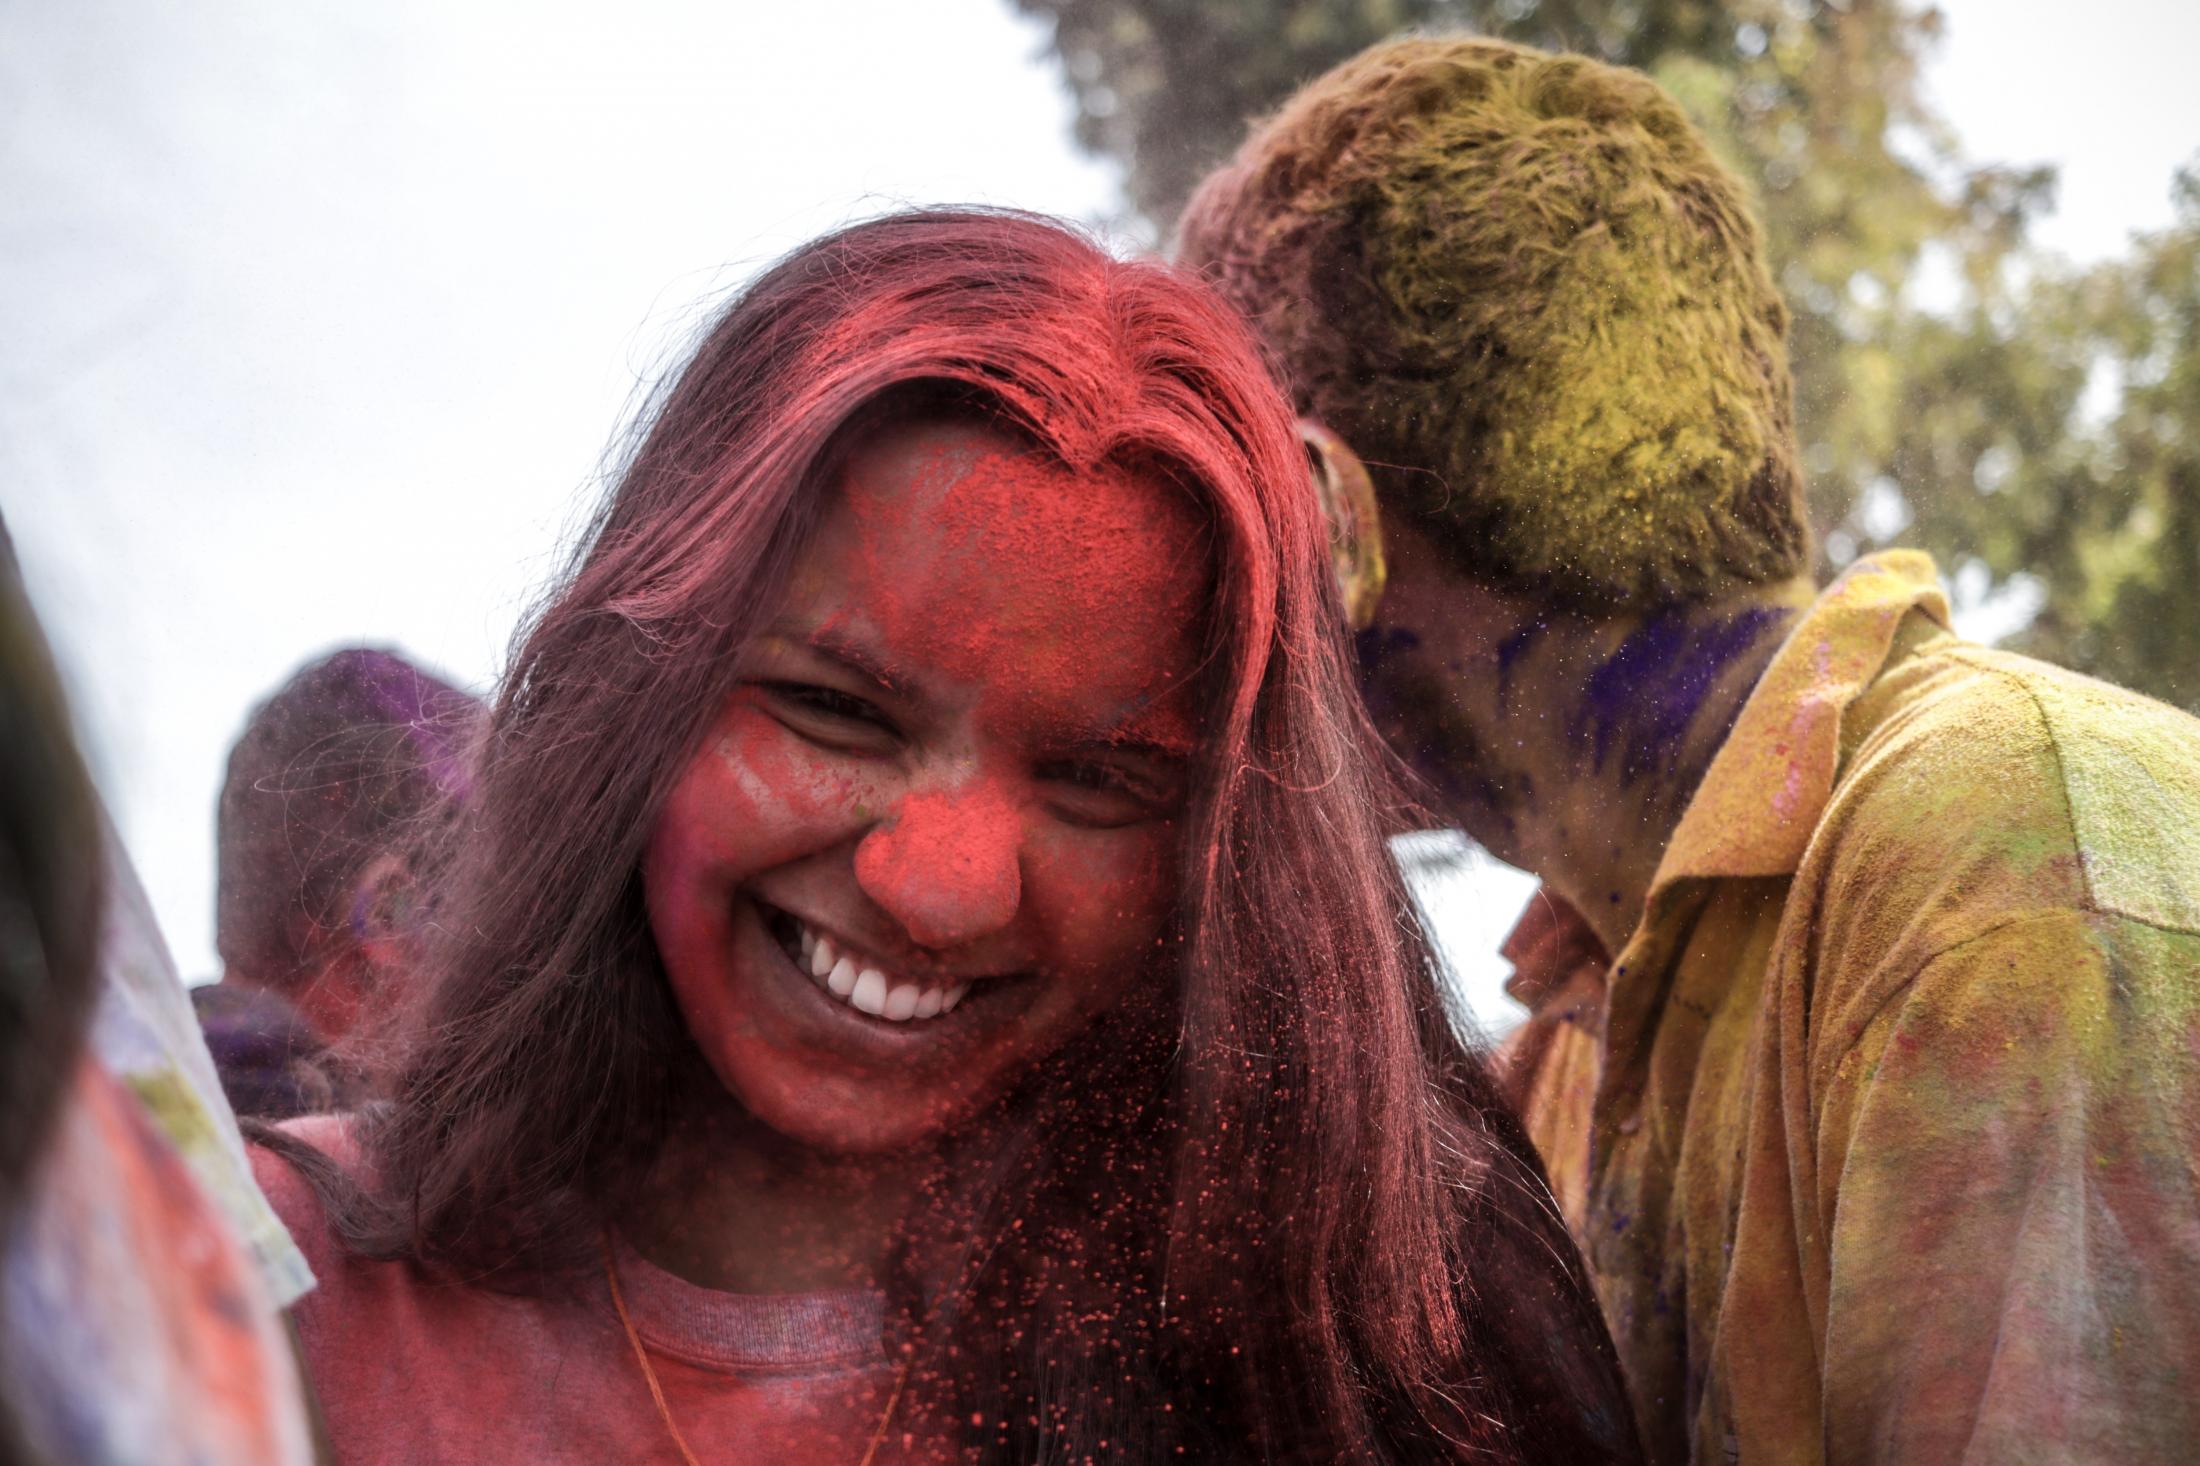 Holi- Festival of colors - Ananya, 21, laughs as her friend just threw color at her,...